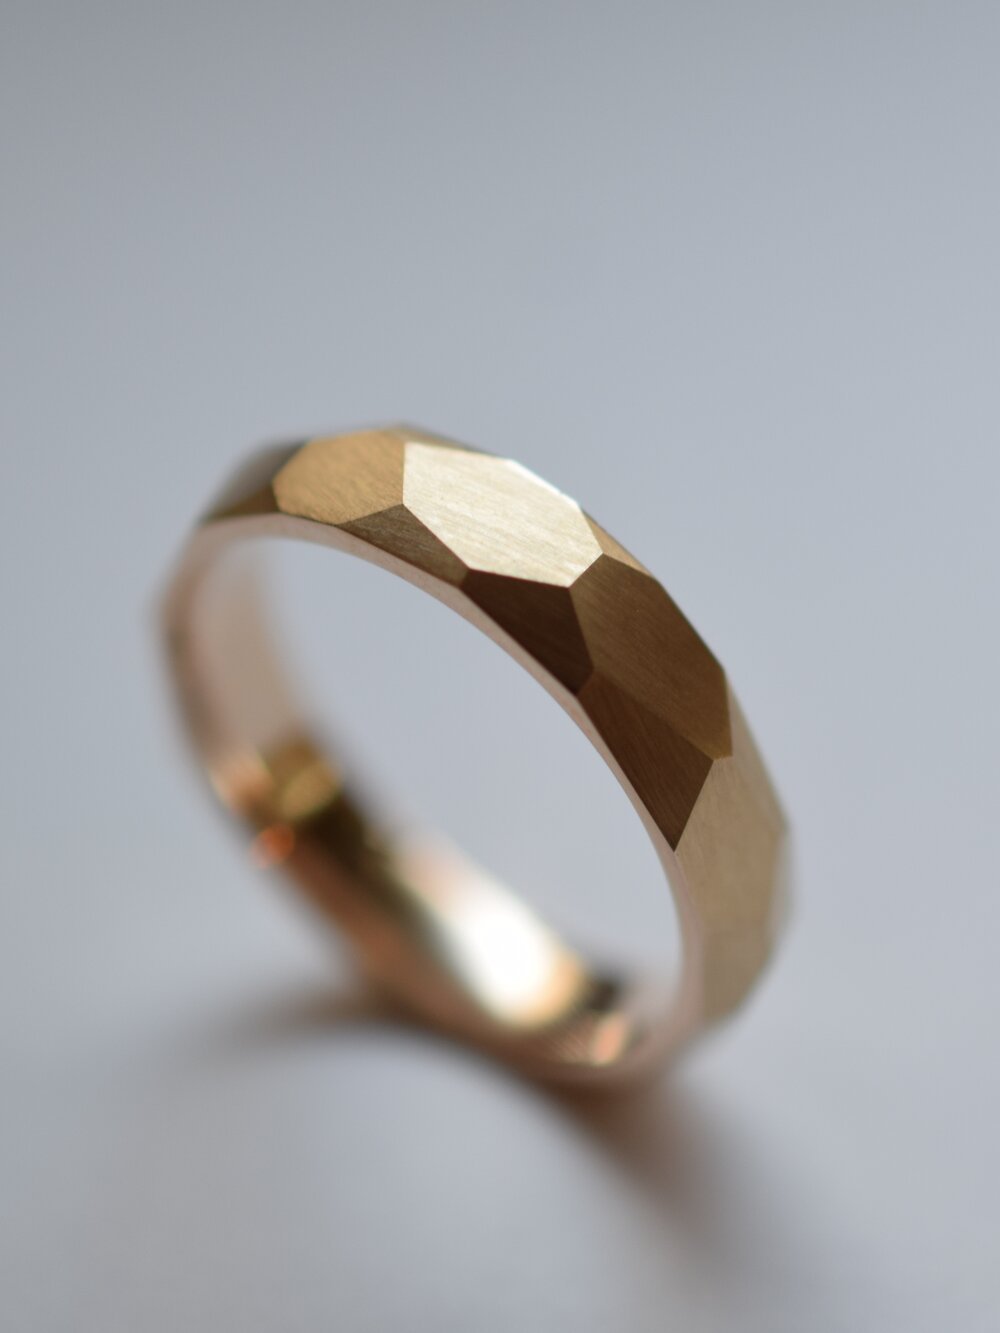 ISLEjewellery.Fionn.Faceted.Band+1800x2400.jpg